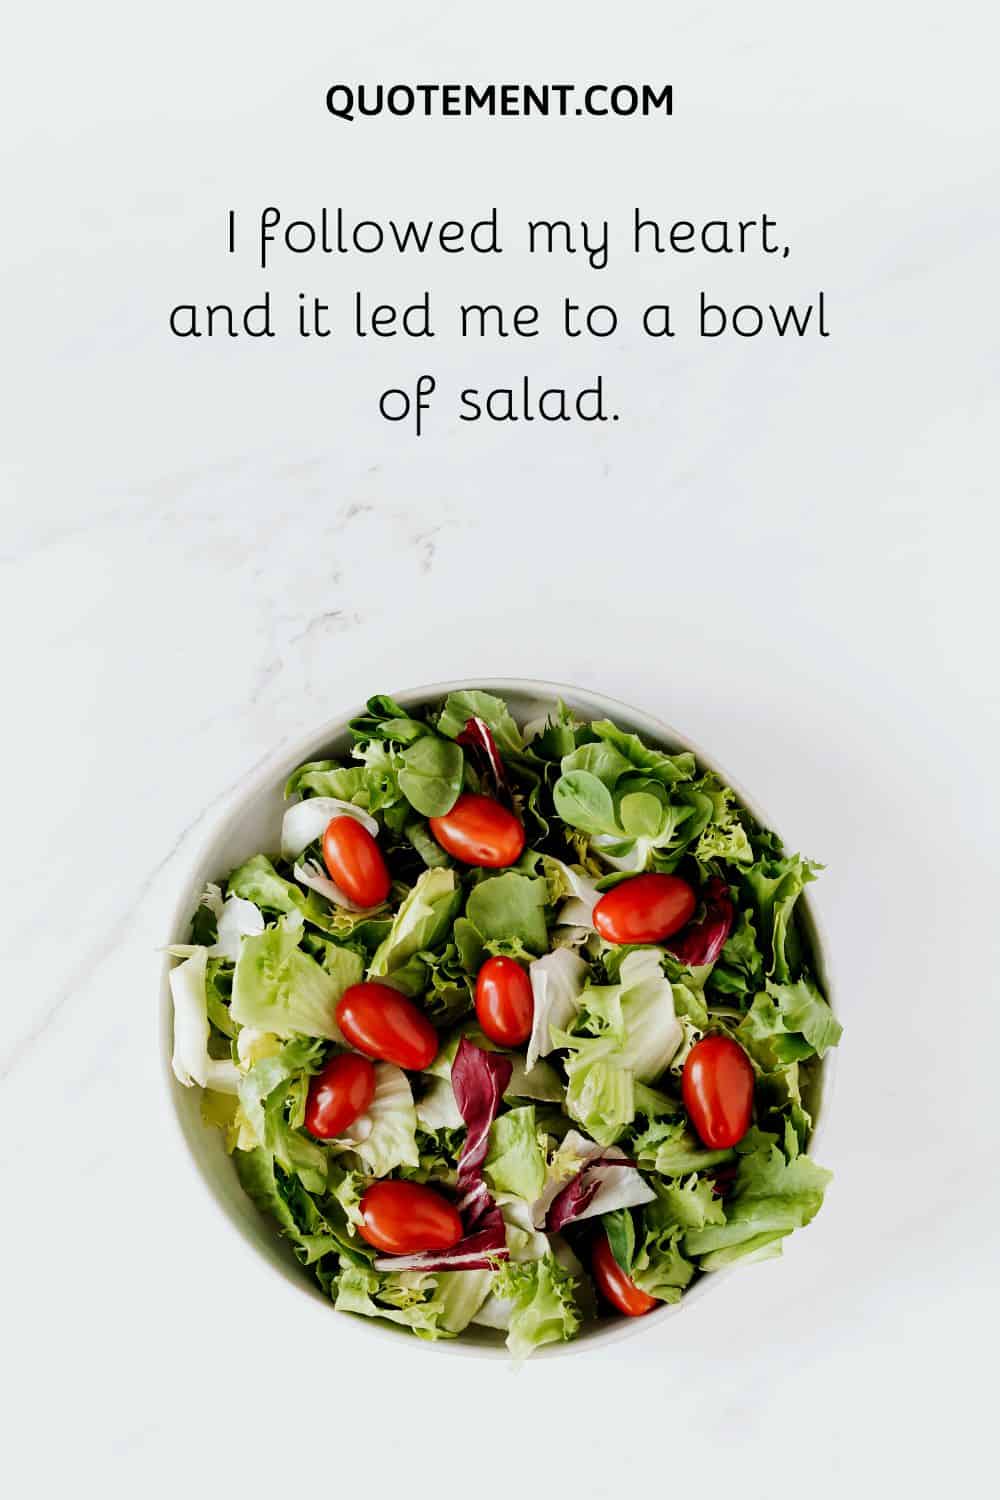 I followed my heart, and it led me to a bowl of salad